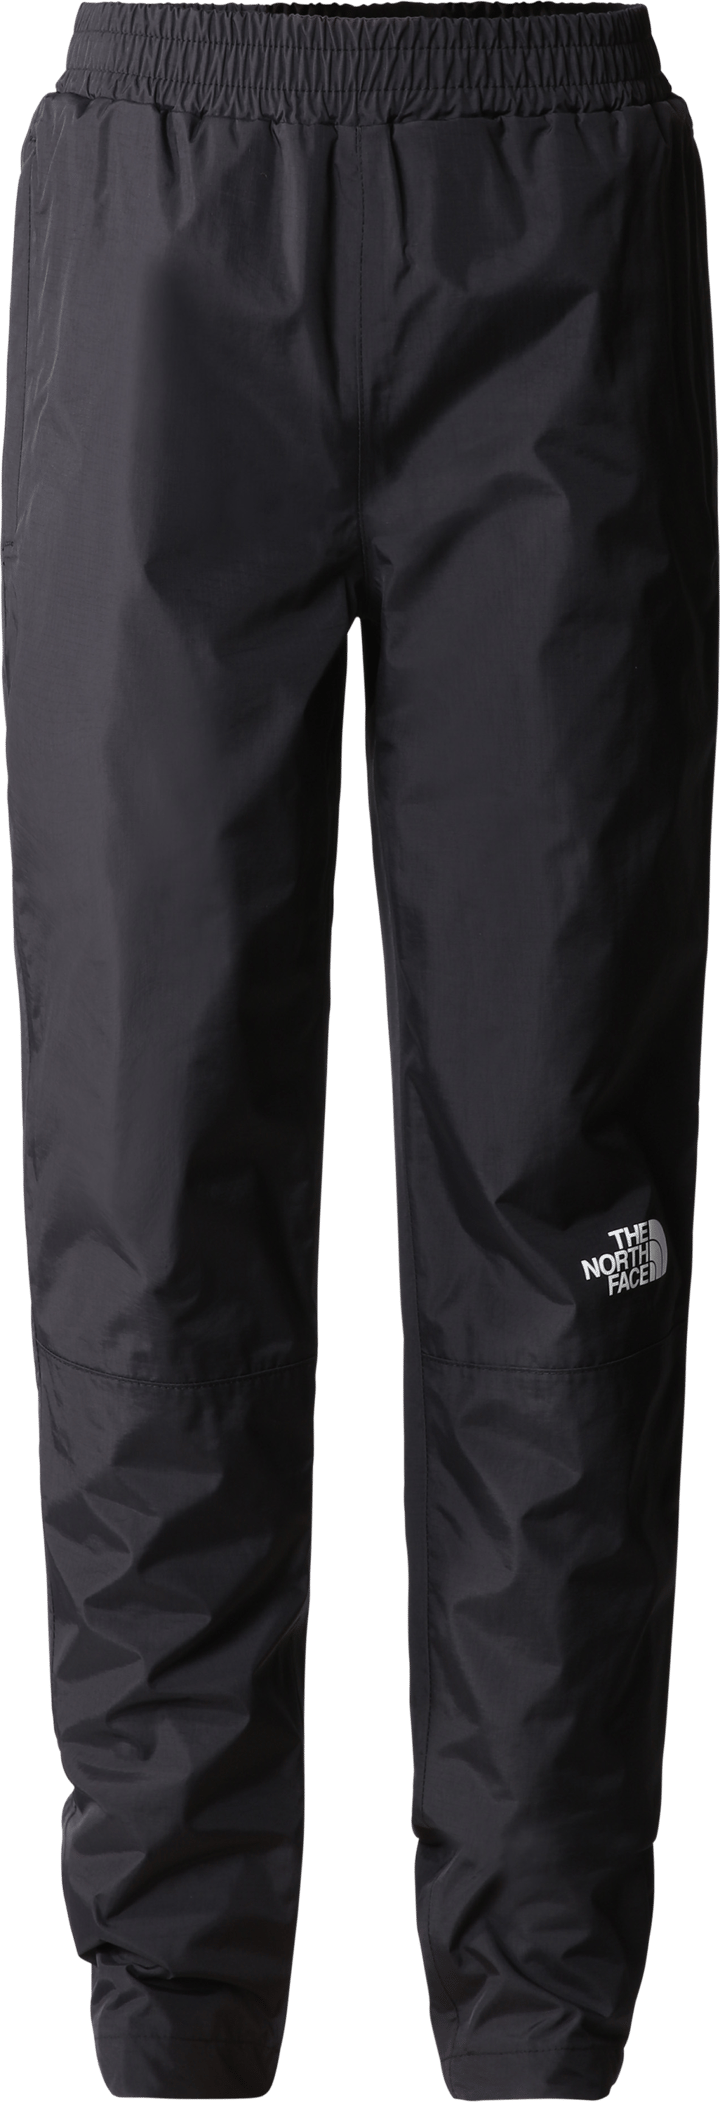 The North Face Kids' Rainwear Overpants TNF Black The North Face